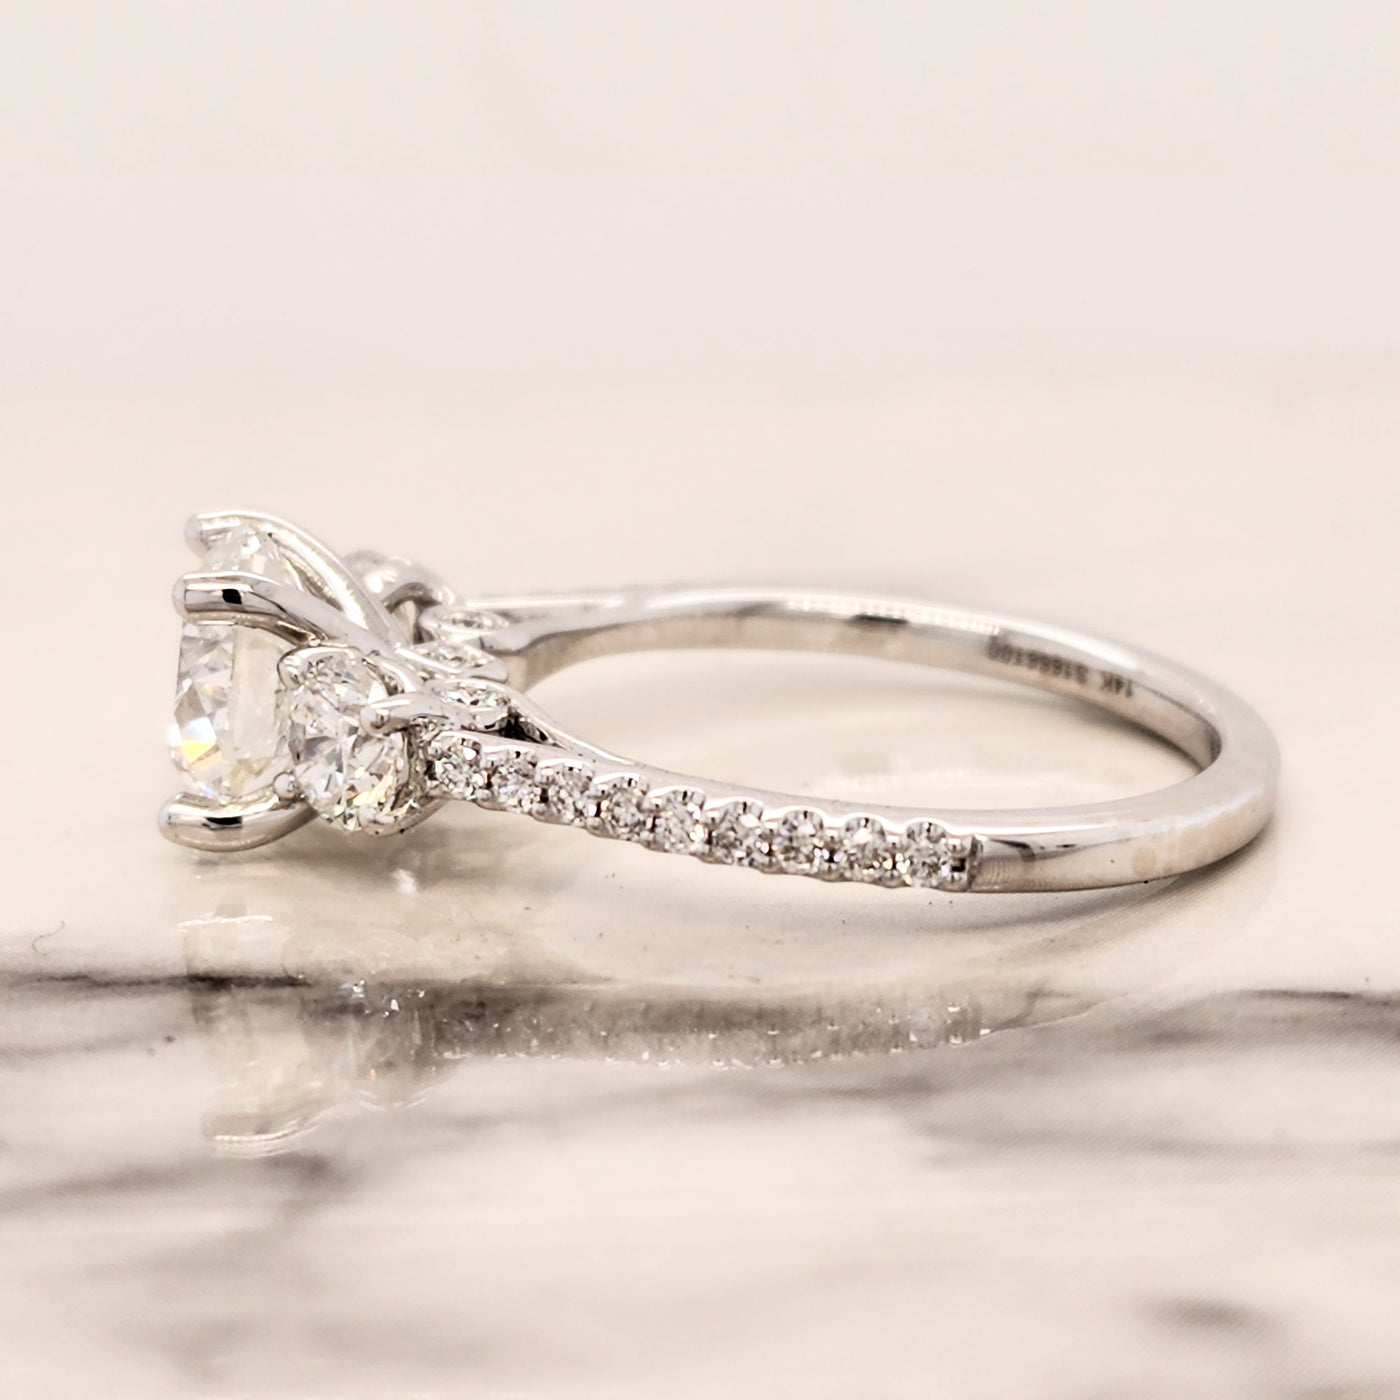 White Gold 3 Stone Engagement Ring With Round Center Diamond and Round Accents